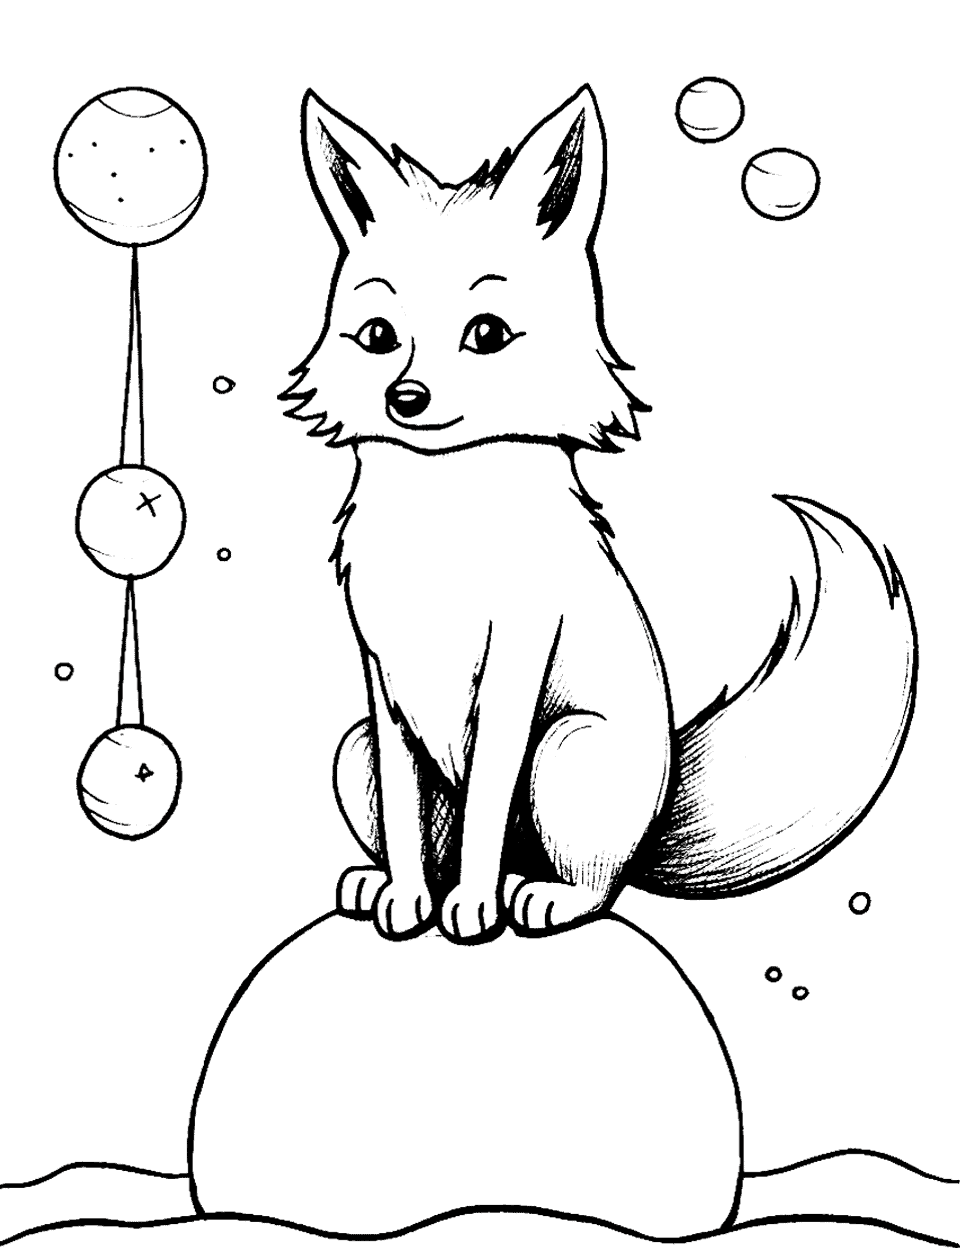 Fox's Circus Act Fox Coloring Page - Balancing on a ball, our fox is the star performer of the circus night.